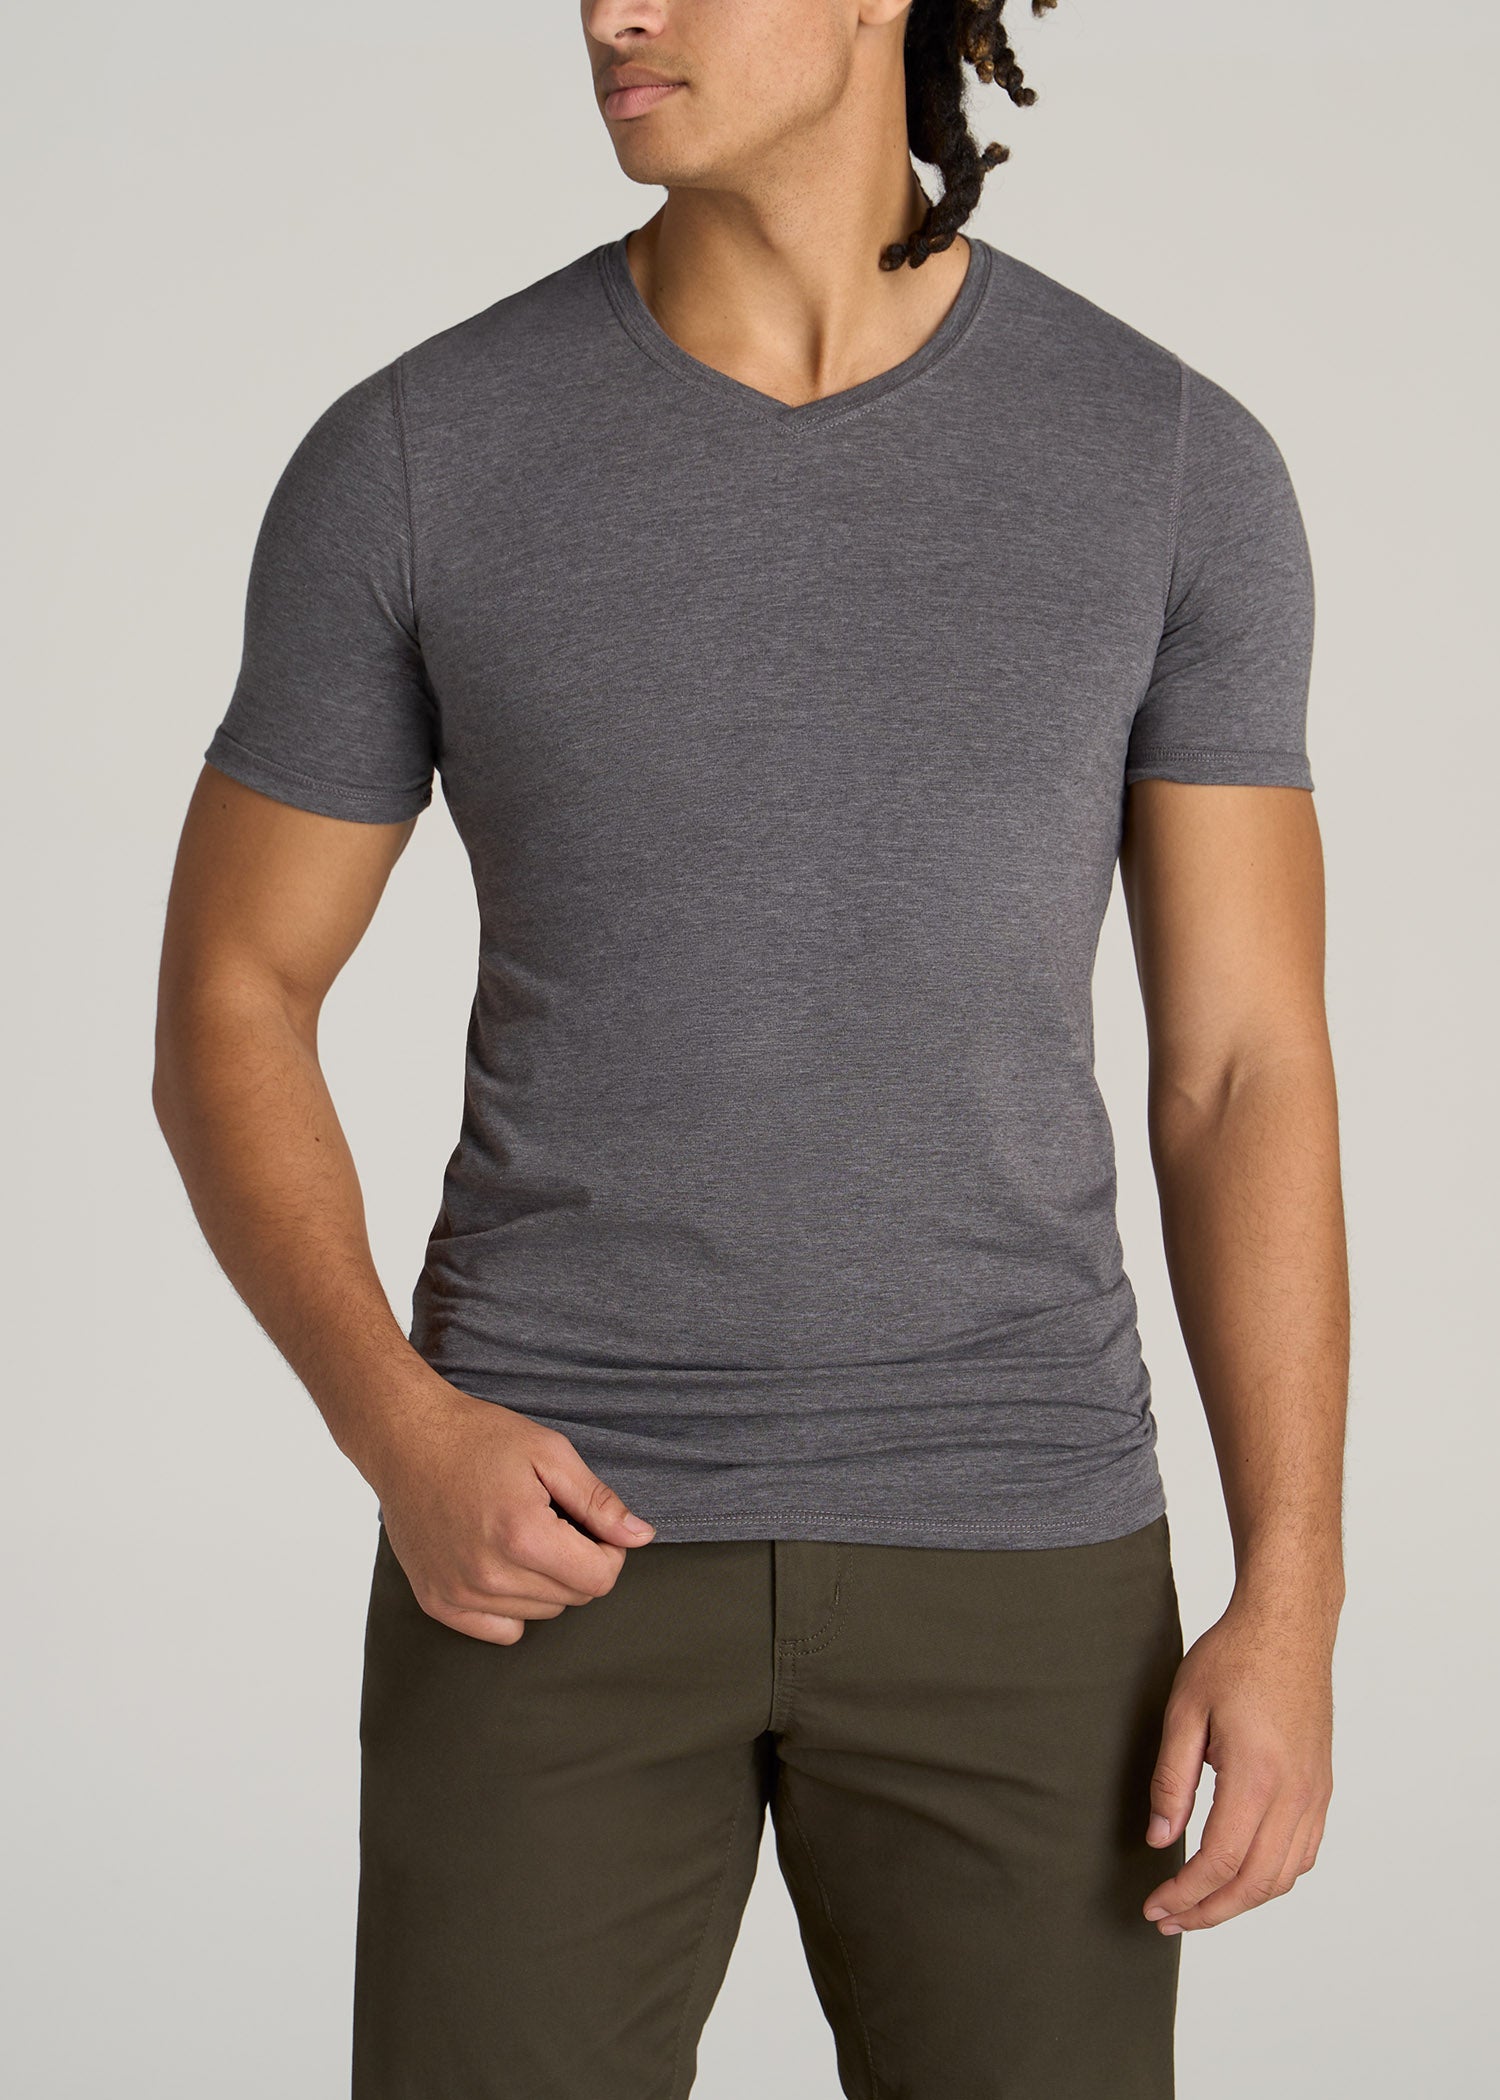    American-Tall-Men-Essential-SLIM-FIT-V-Neck-Tees-Charocal-Mix-front